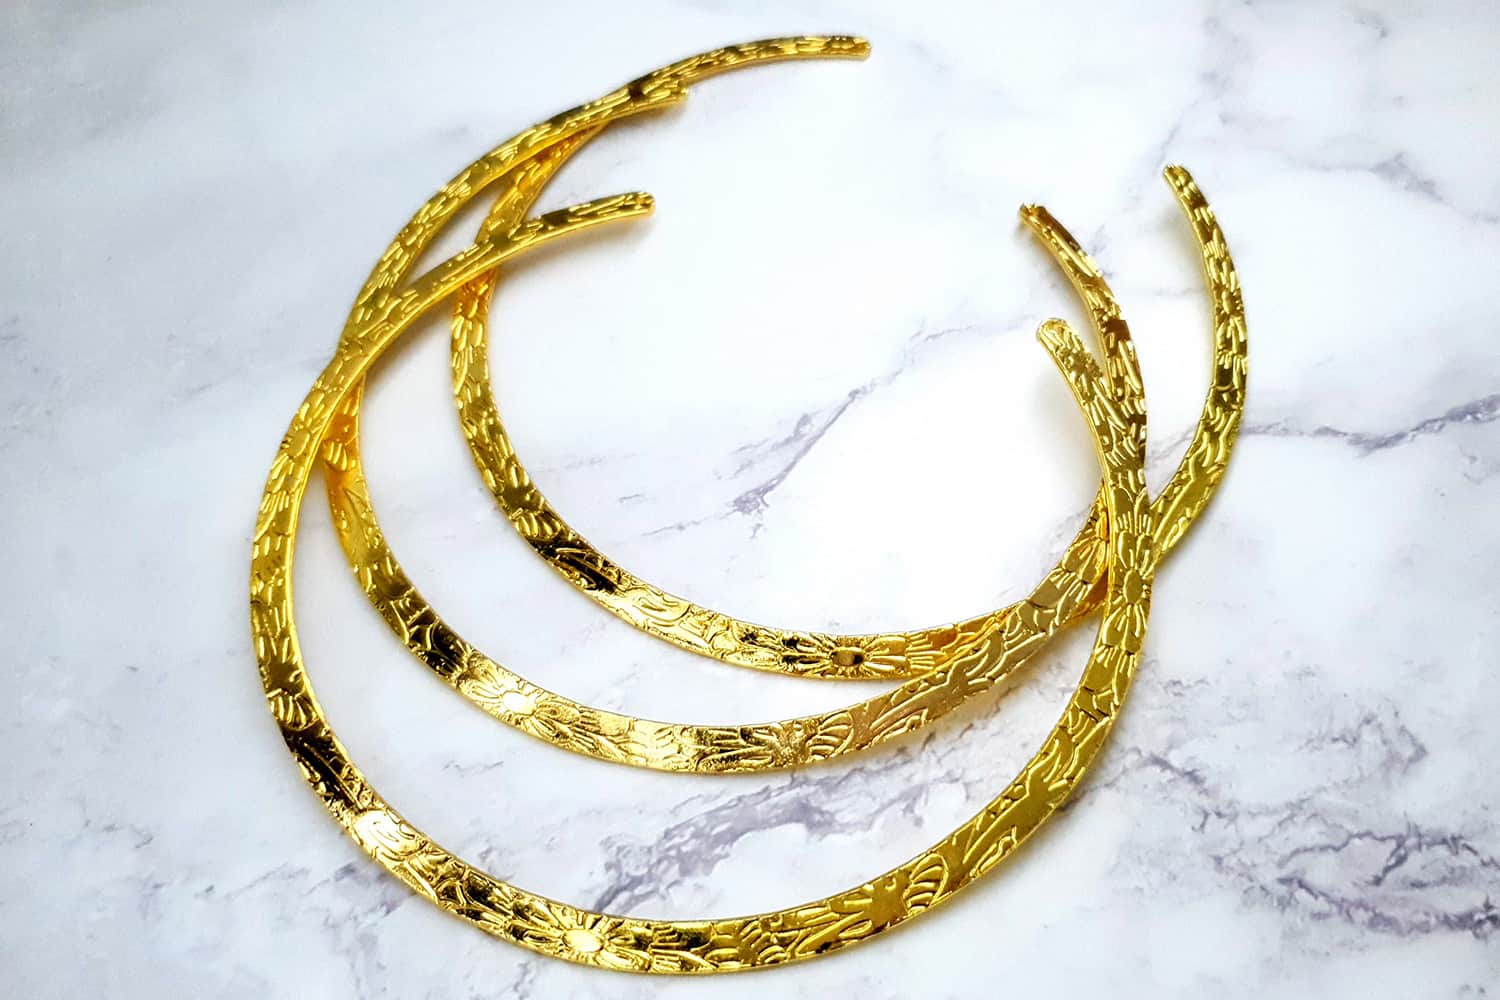 3 Pieces Of Golden Metal Necklaces For Pendant #25342